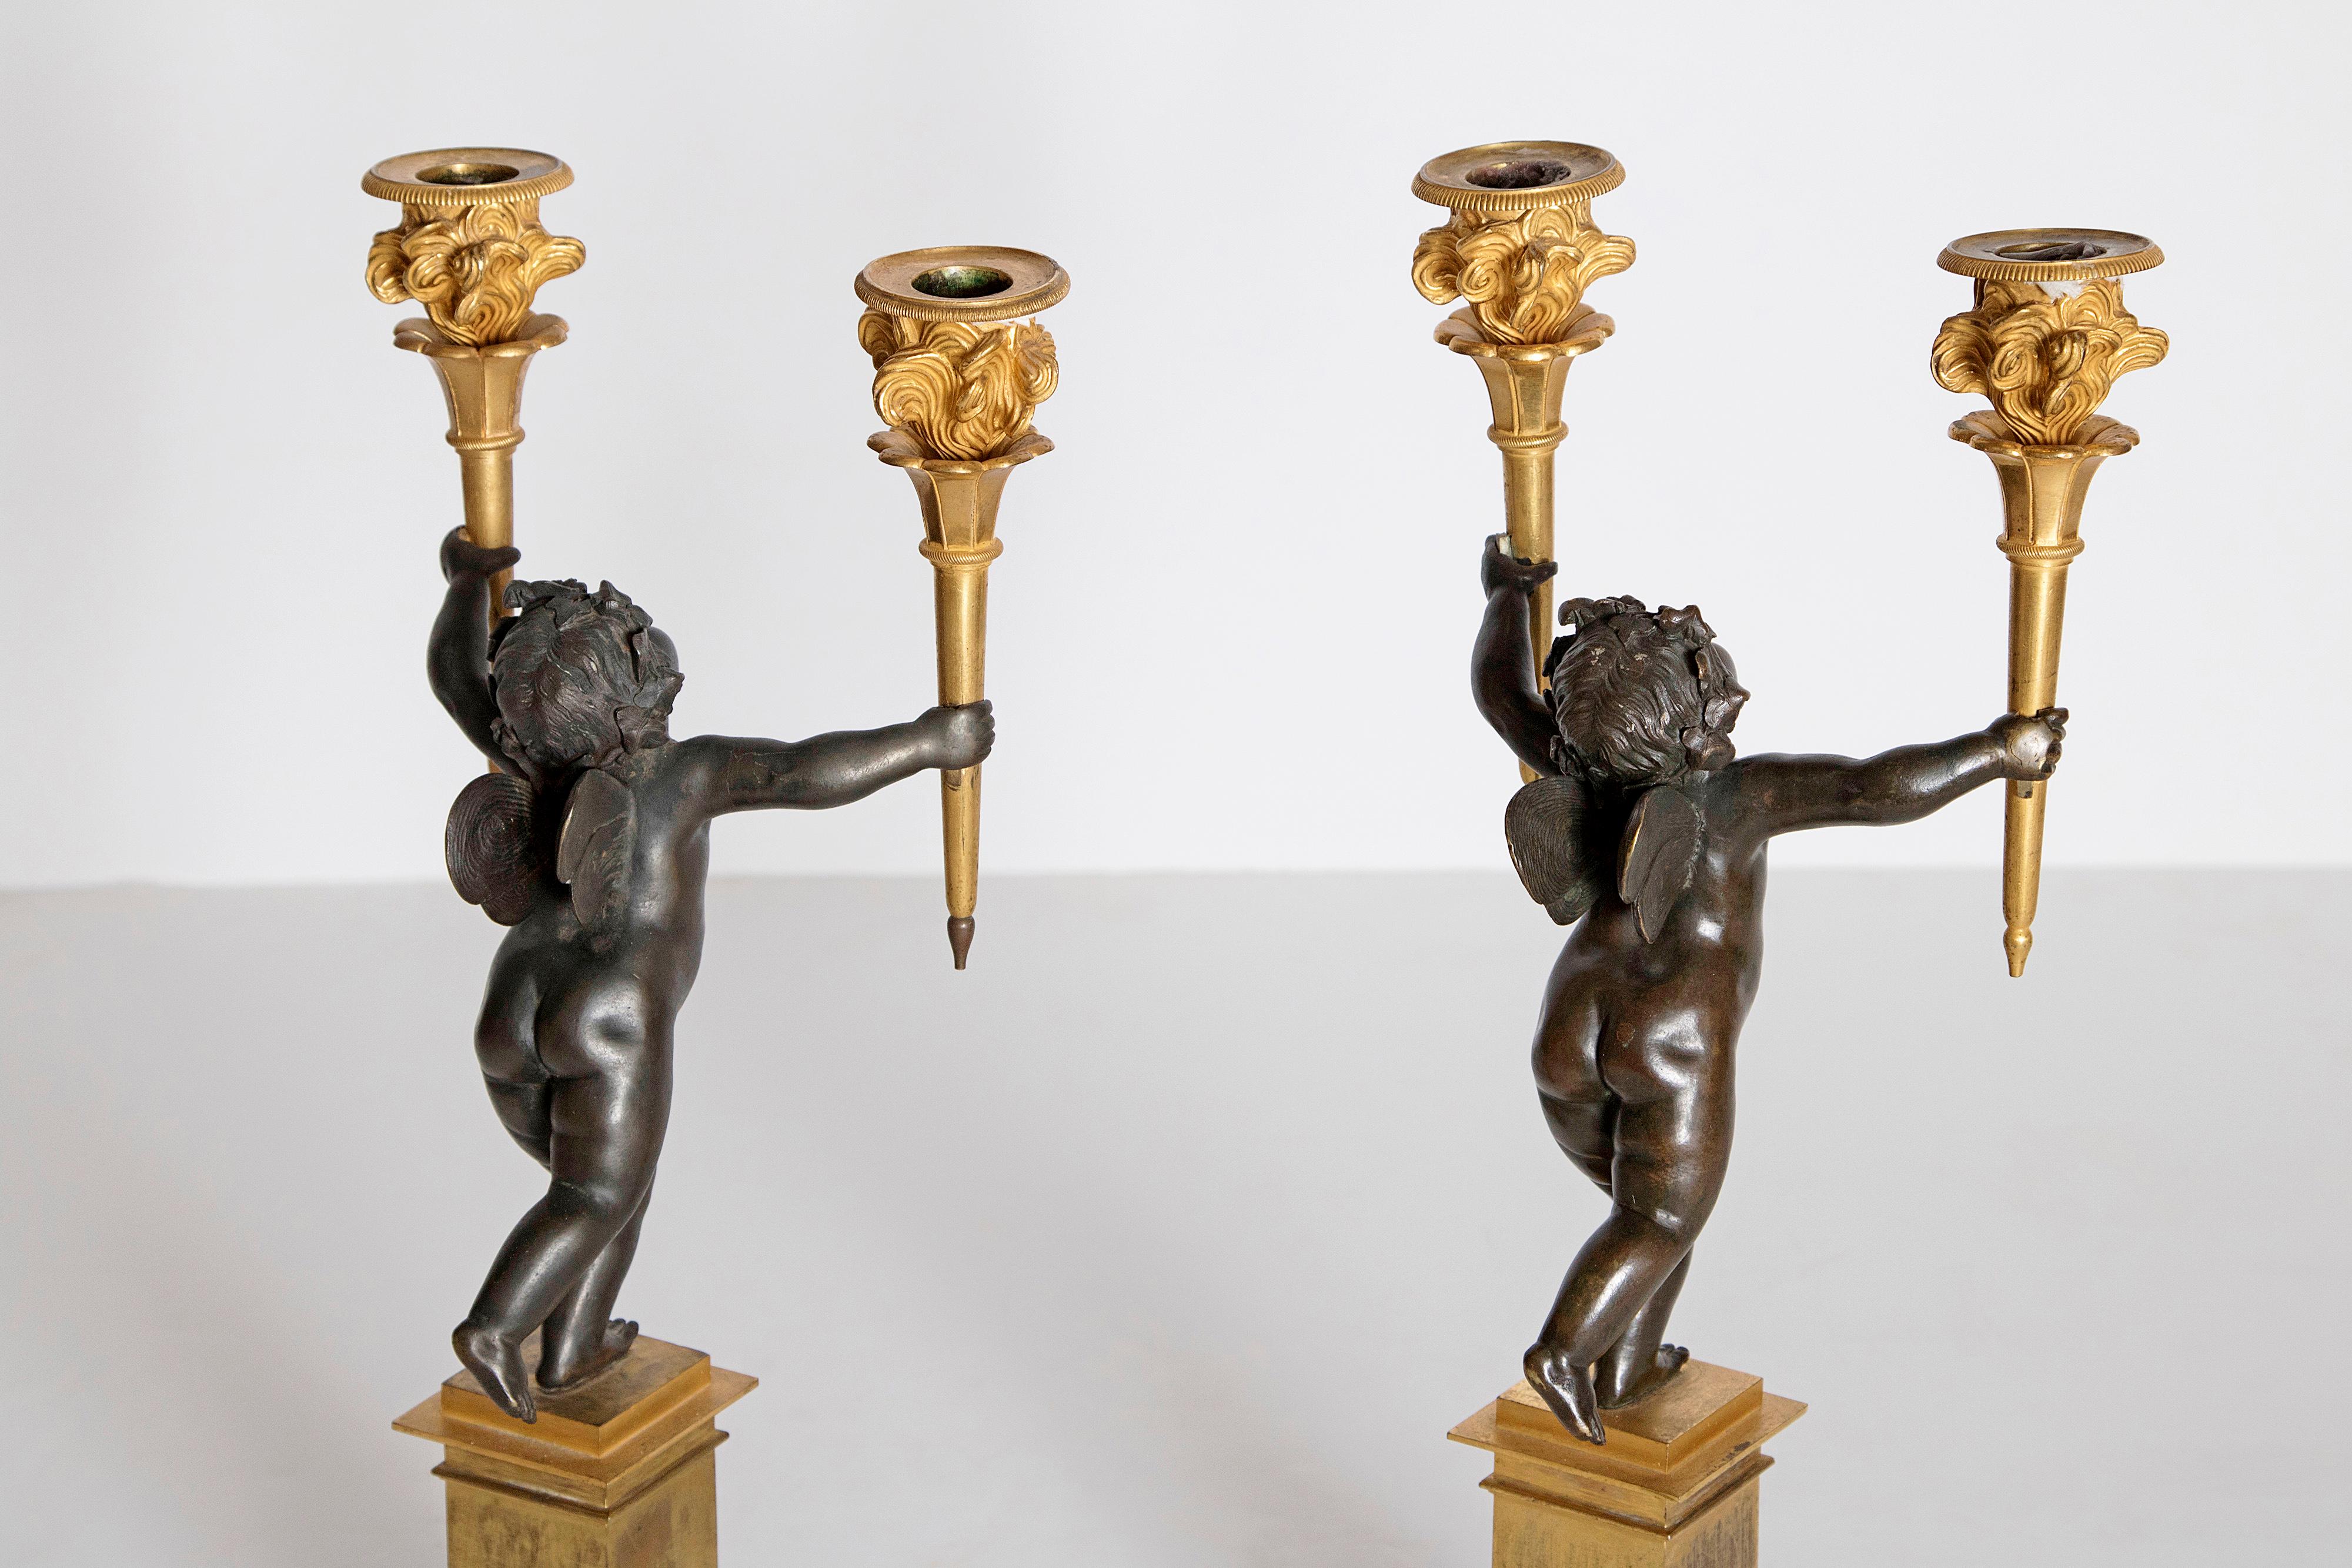 Pair of French Charles X Patinated Bronze and Gilt Figurative Candelabras For Sale 2